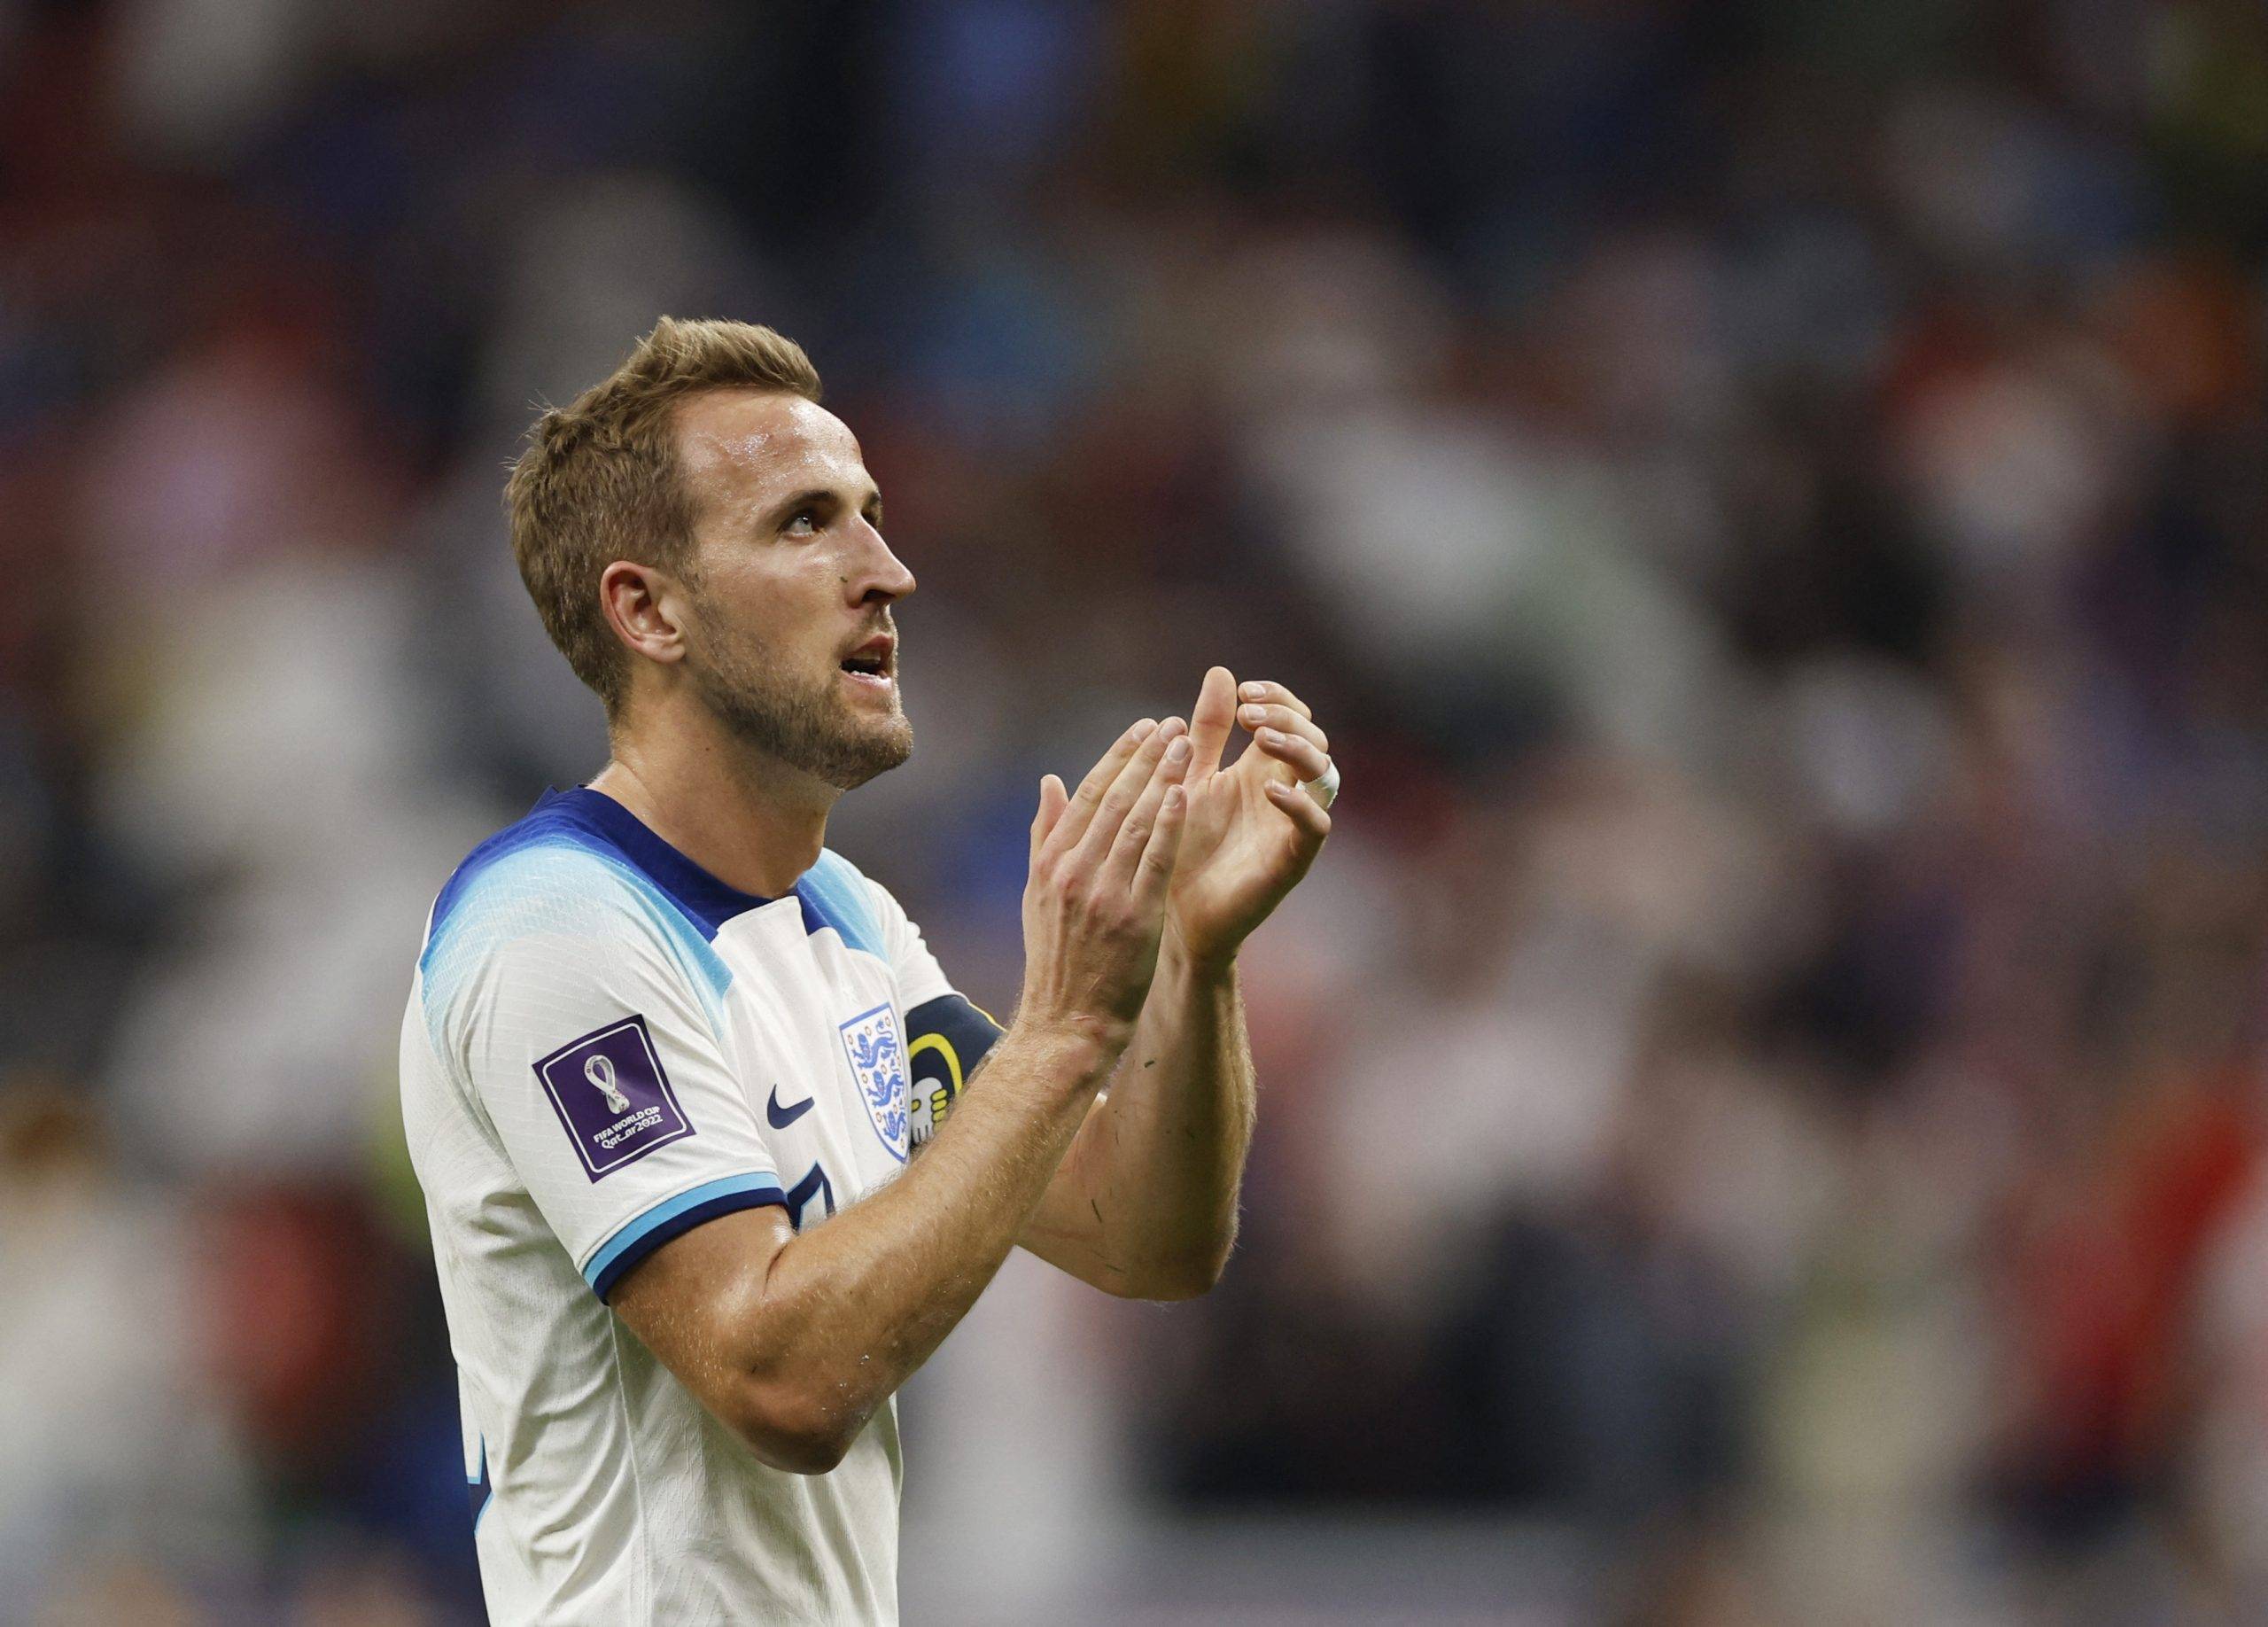 Newcastle: Magpies could make audacious Harry Kane swoop - Follow up